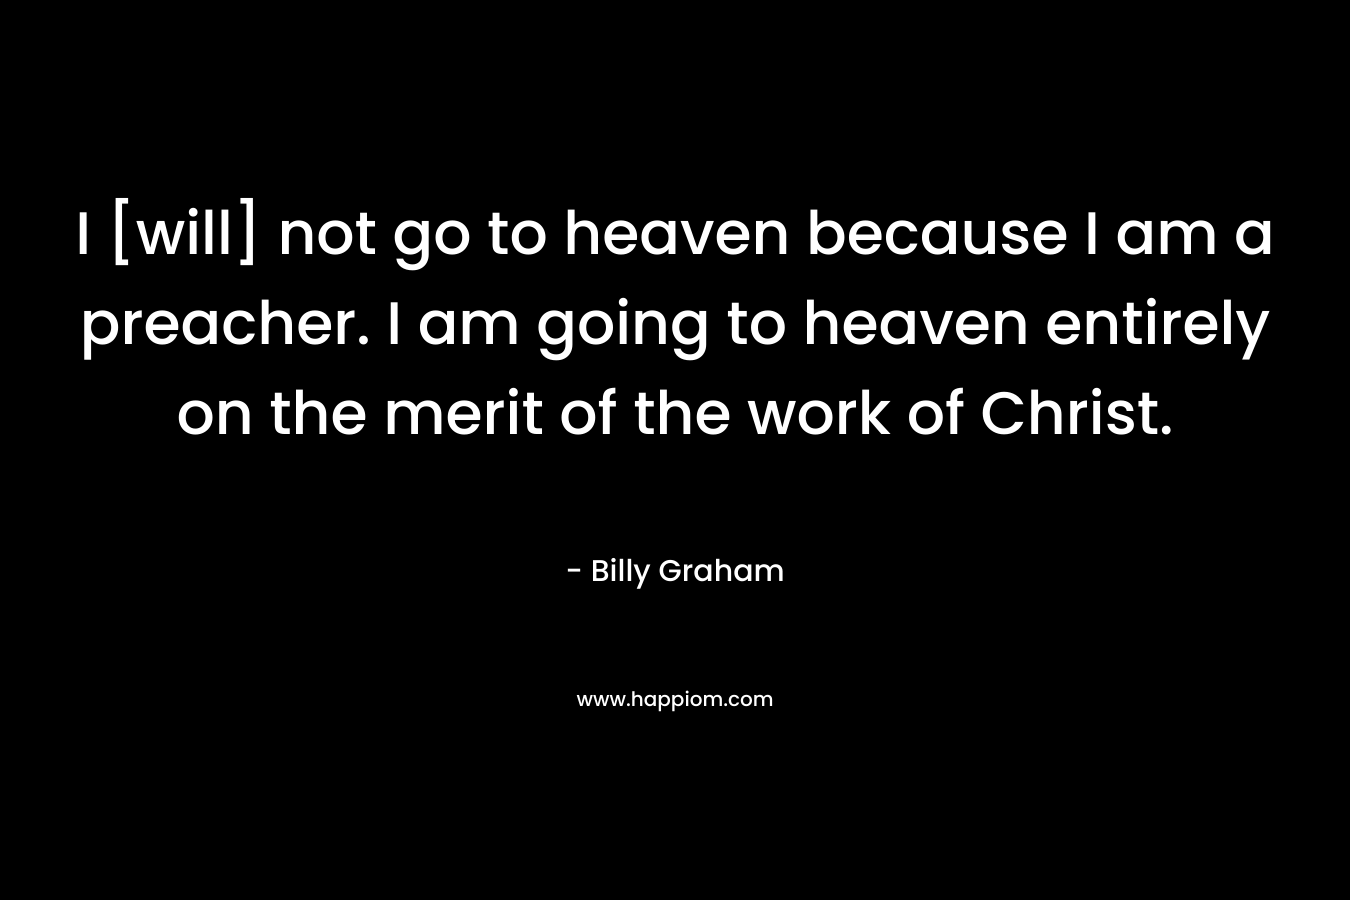 I [will] not go to heaven because I am a preacher. I am going to heaven entirely on the merit of the work of Christ. – Billy Graham